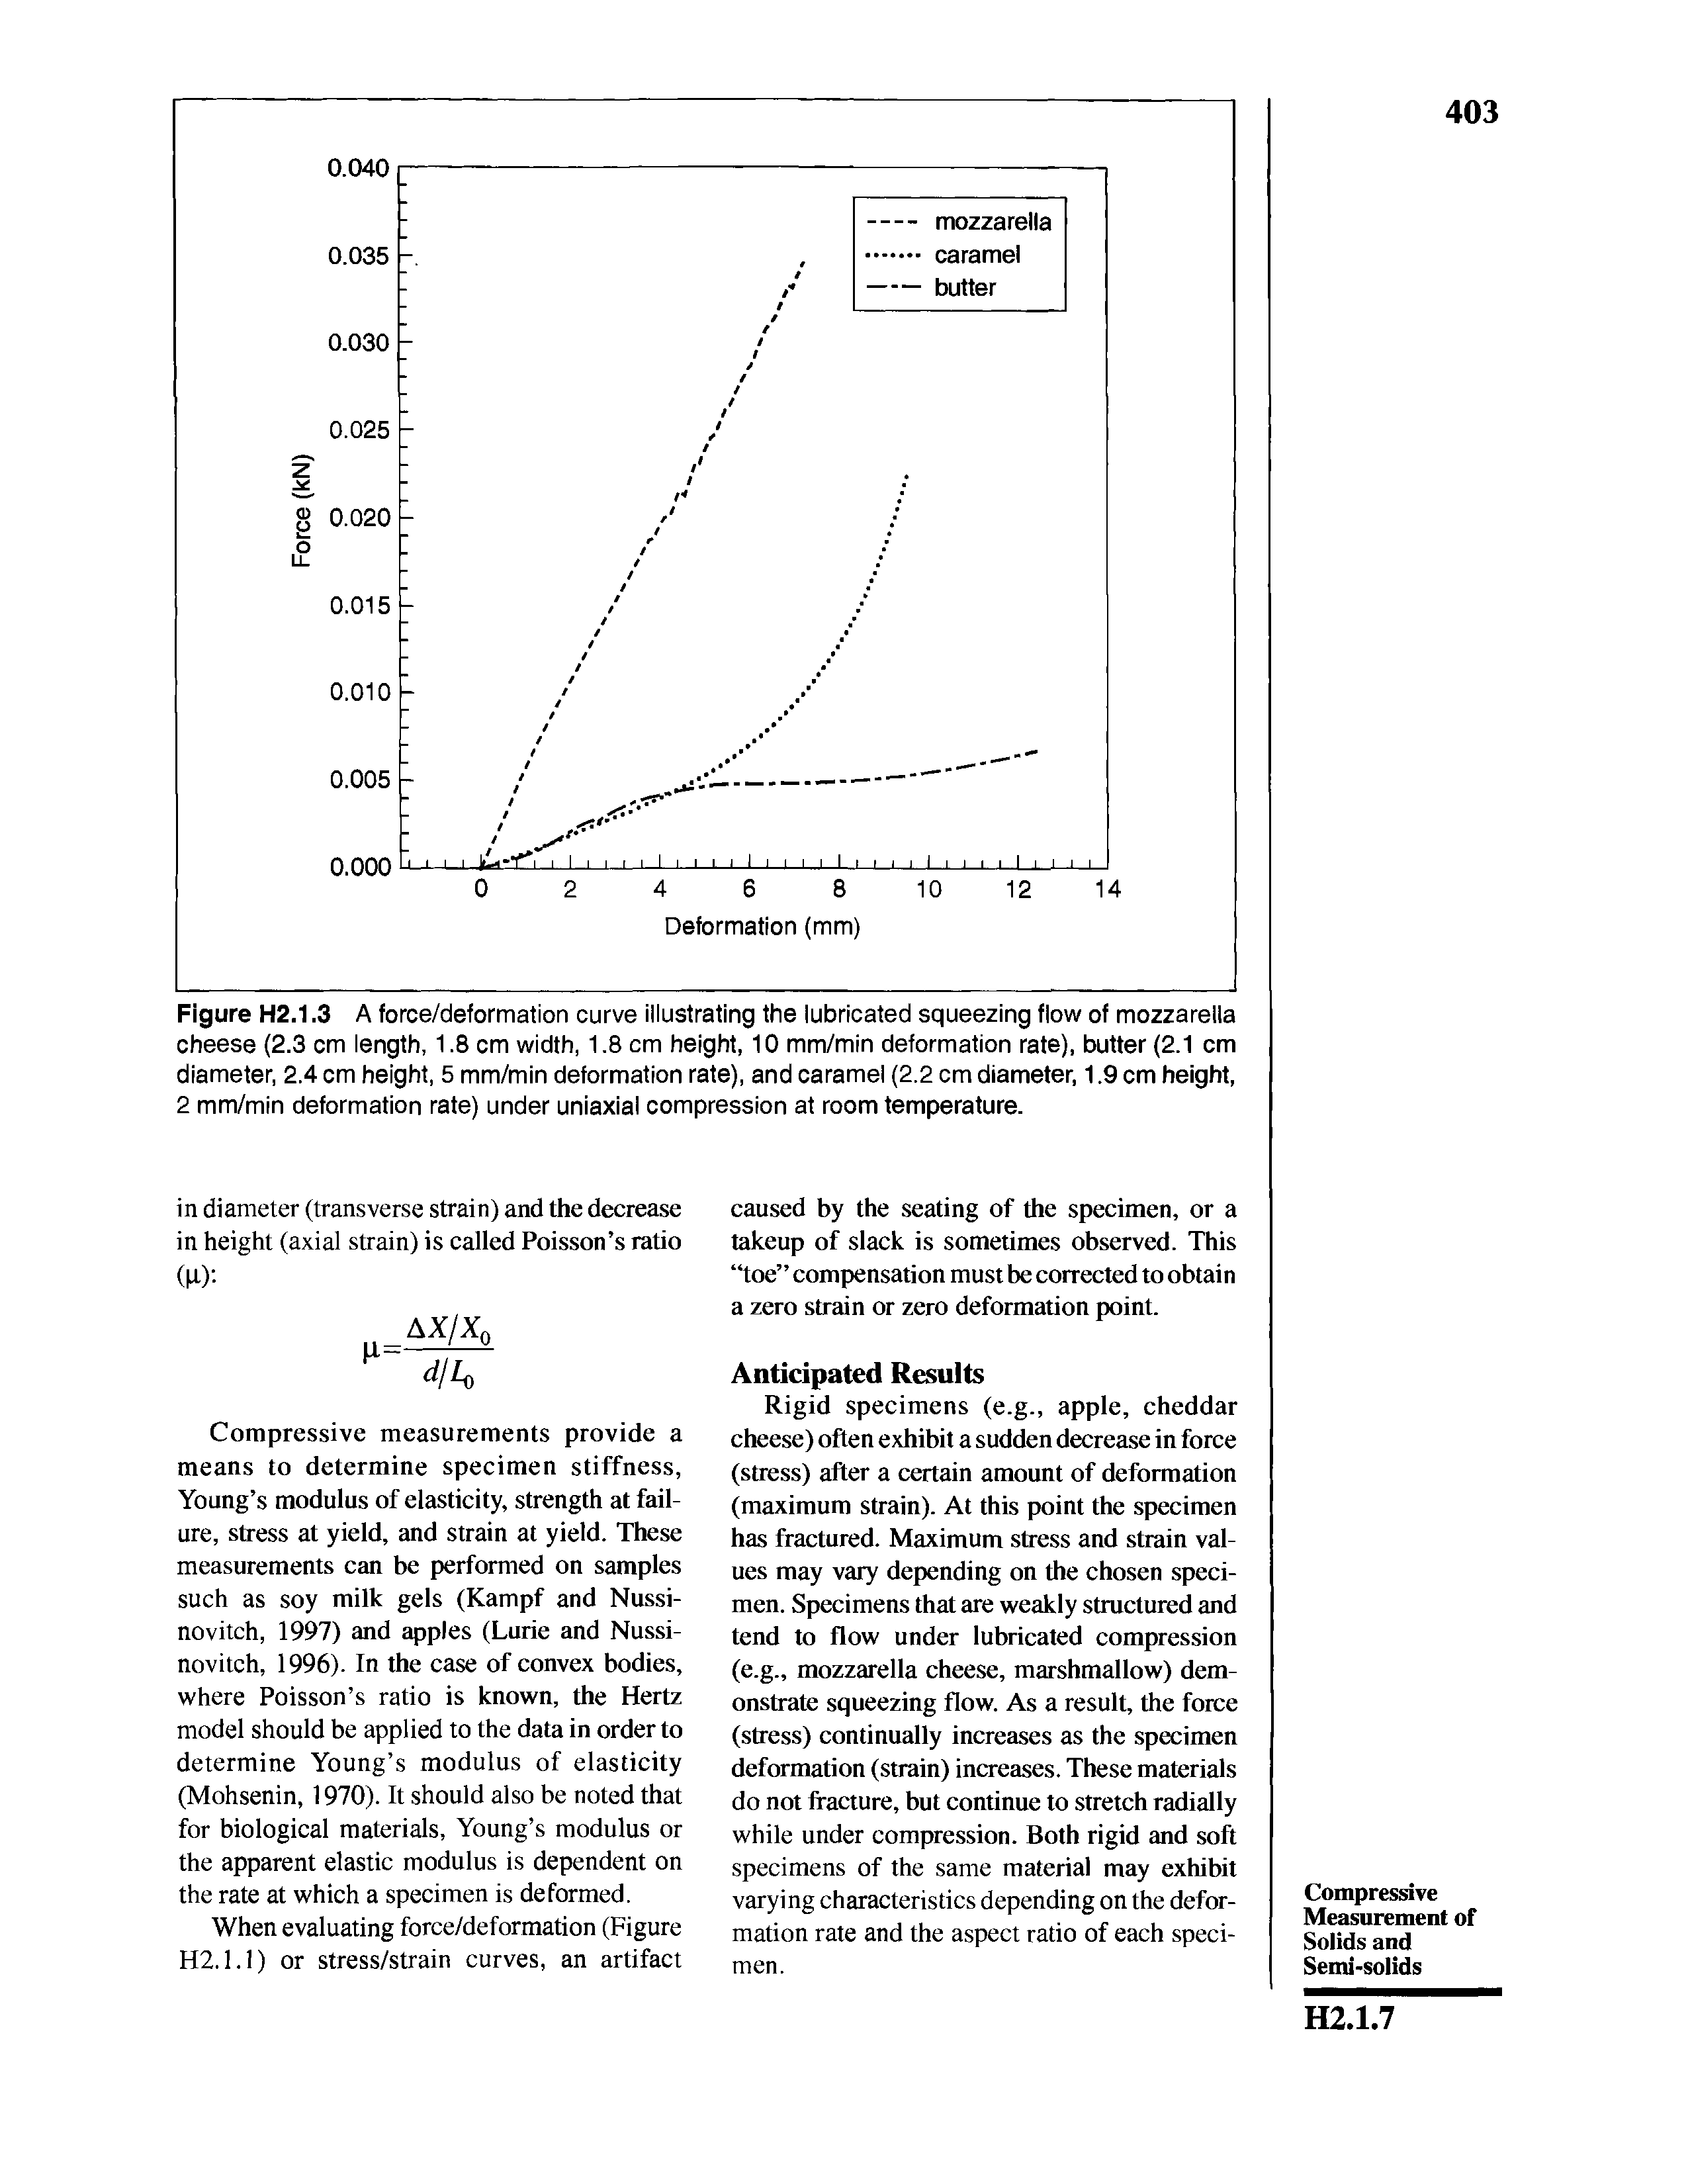 Figure H2.1.3 A force/deformation curve illustrating the lubricated squeezing flow of mozzarella cheese (2.3 cm length, 1.8 cm width, 1.8 cm height, 10 mm/min deformation rate), butter (2.1 cm diameter, 2.4 cm height, 5 mm/min deformation rate), and caramel (2.2 cm diameter, 1.9 cm height, 2 mm/min deformation rate) under uniaxial compression at room temperature.